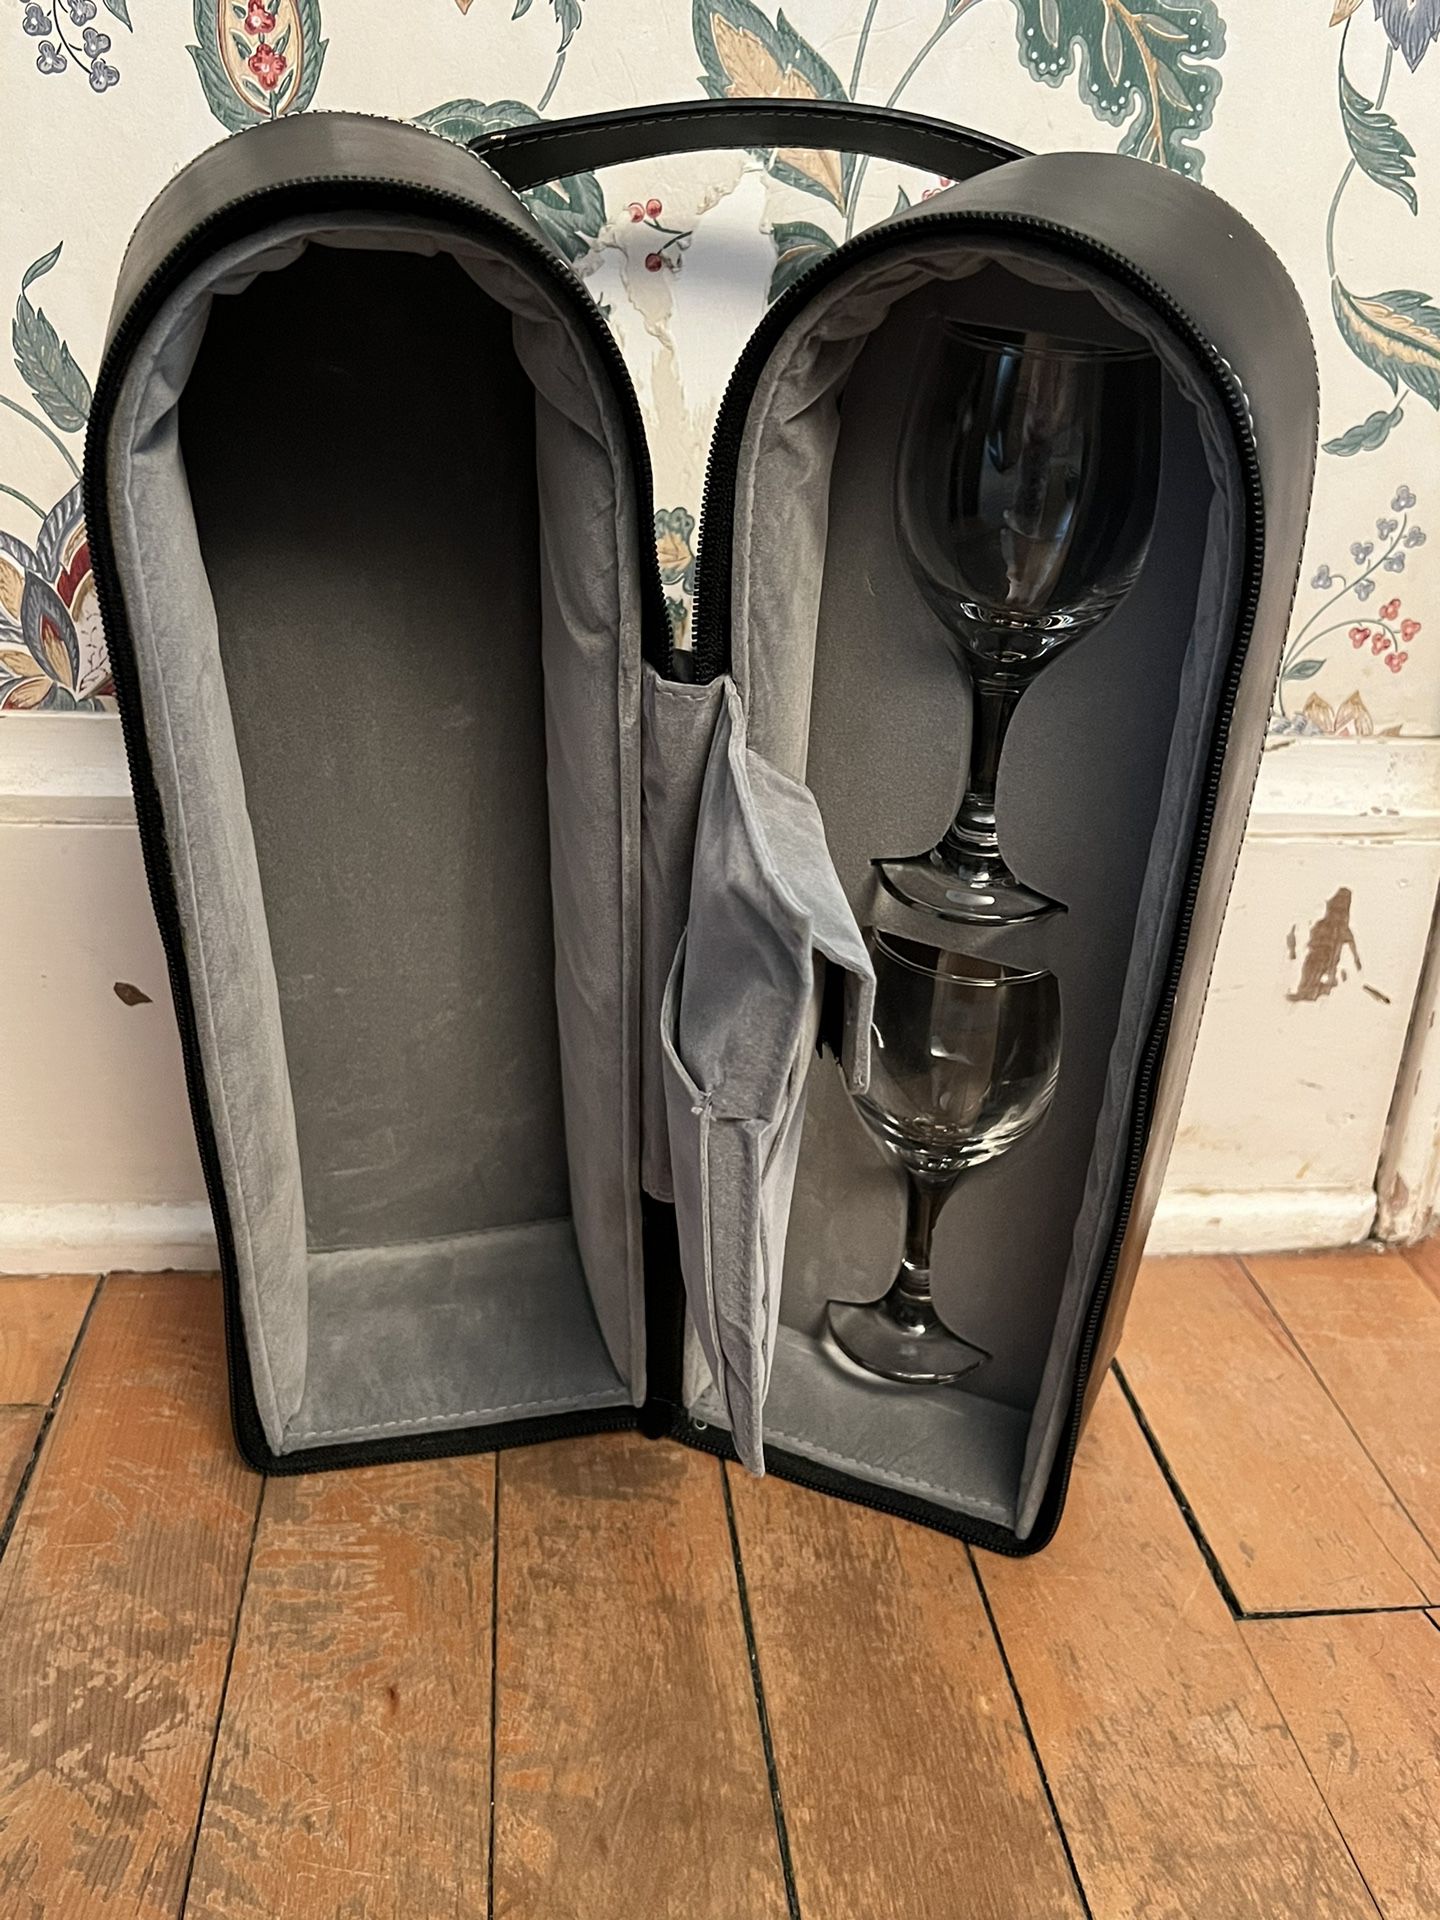 New Geoffrey Beene Wine Set Travel Case - 2 Glasses, Stopper, Corkscrew  (open box) for Sale in Richmond Heights, OH - OfferUp